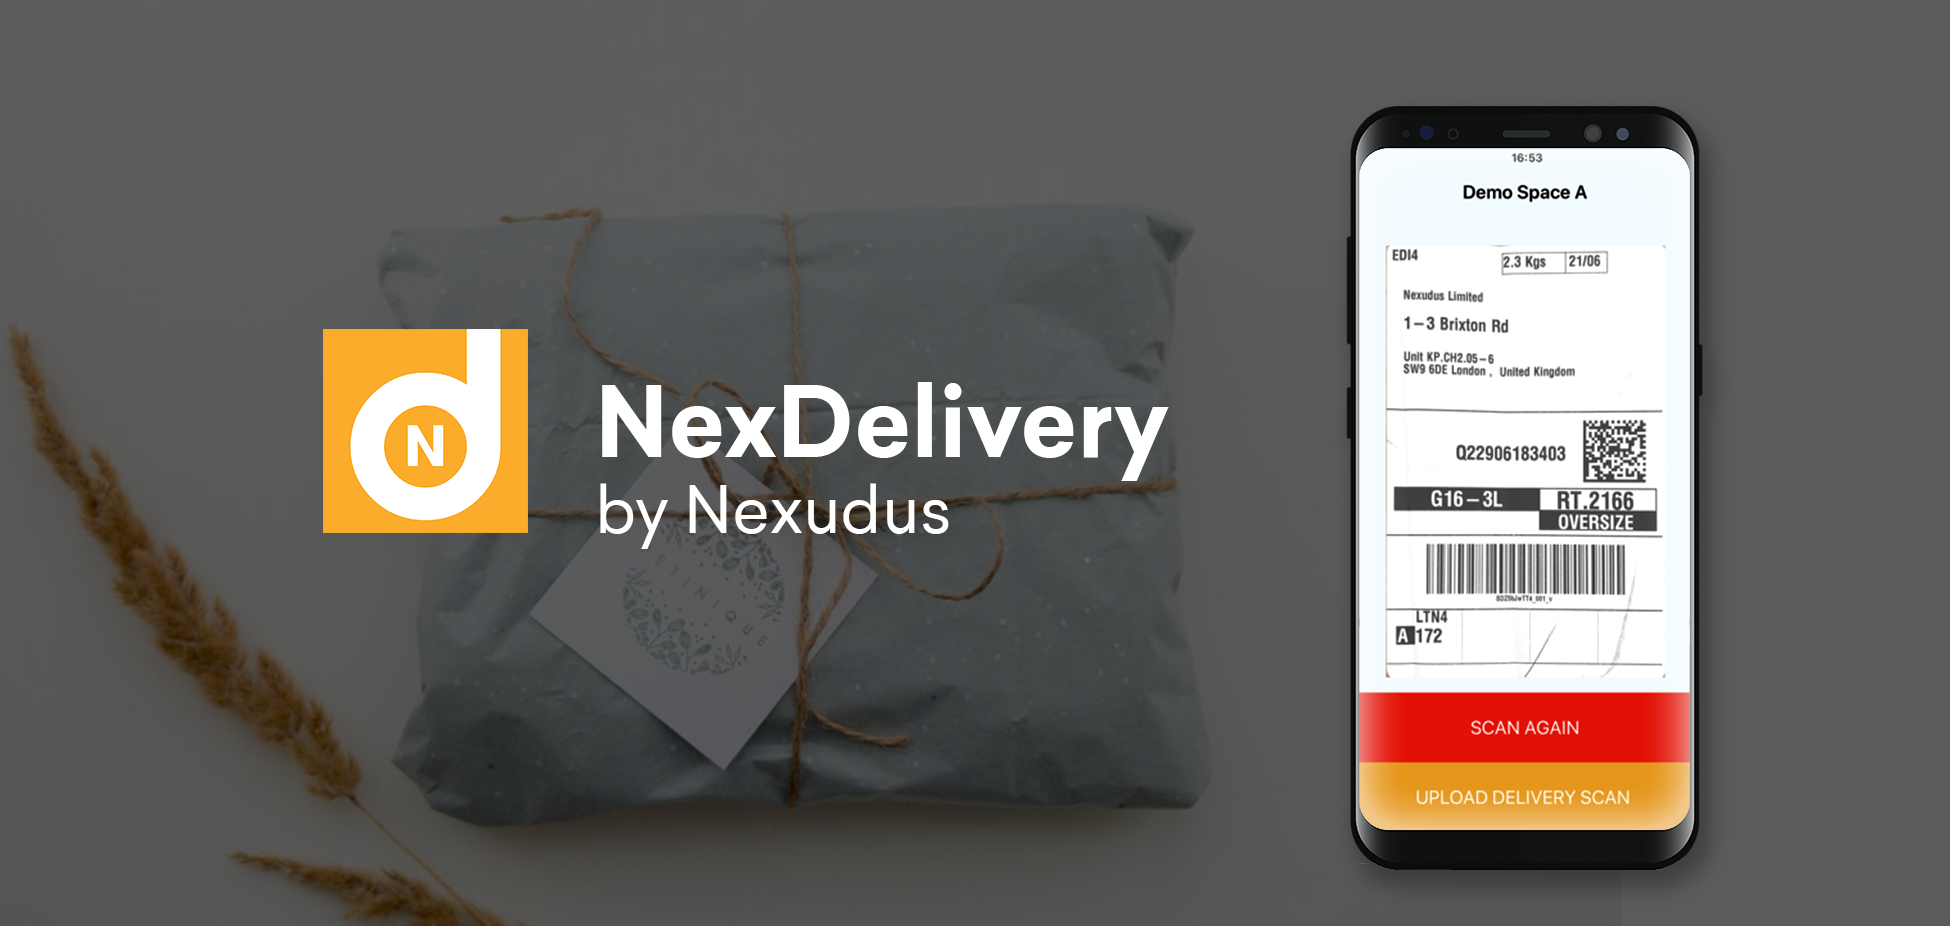 Your NexDelivery has arrived!